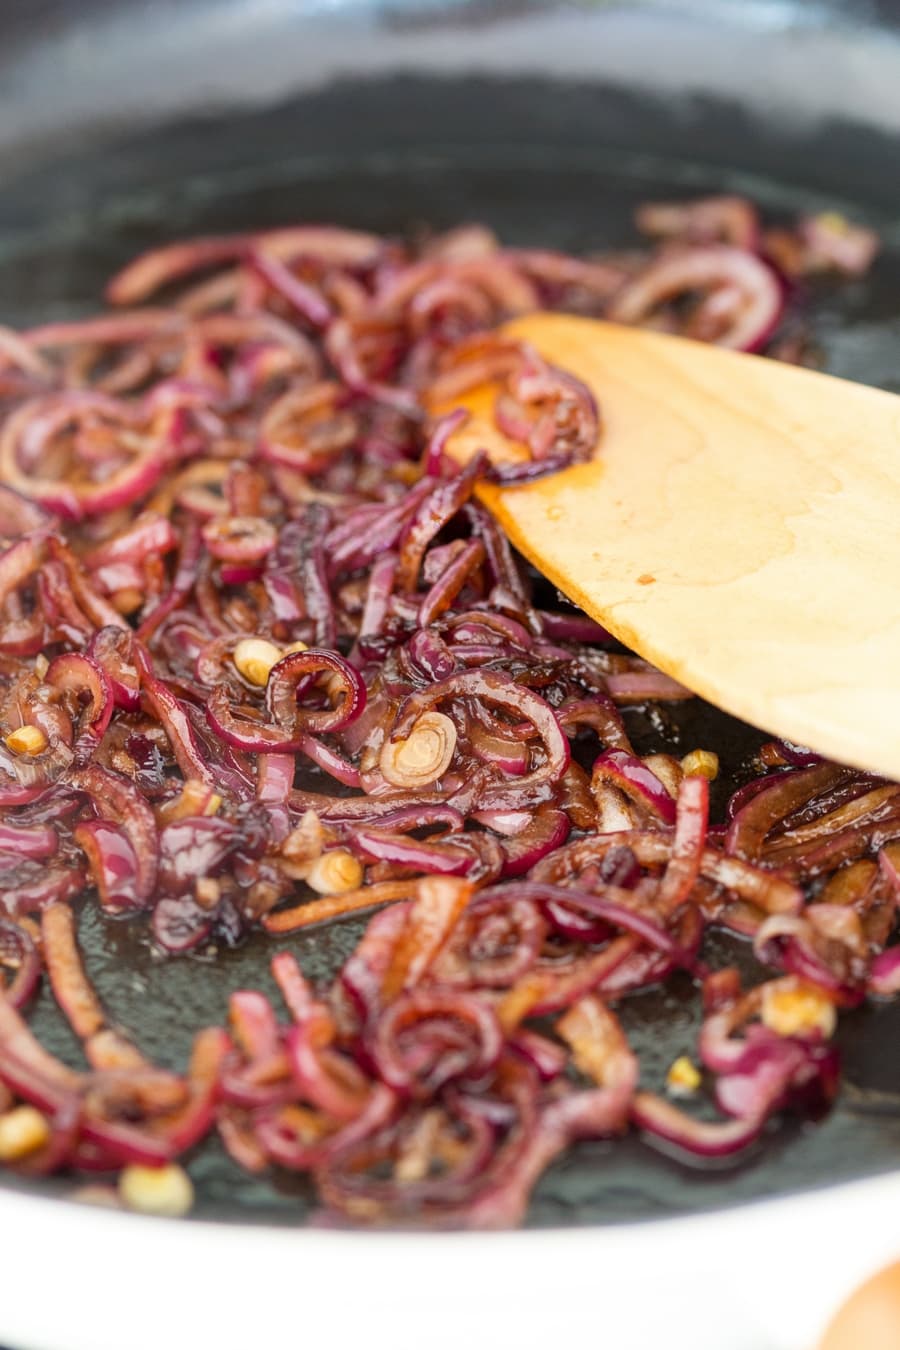 Balsamico added to sautéed red onions.